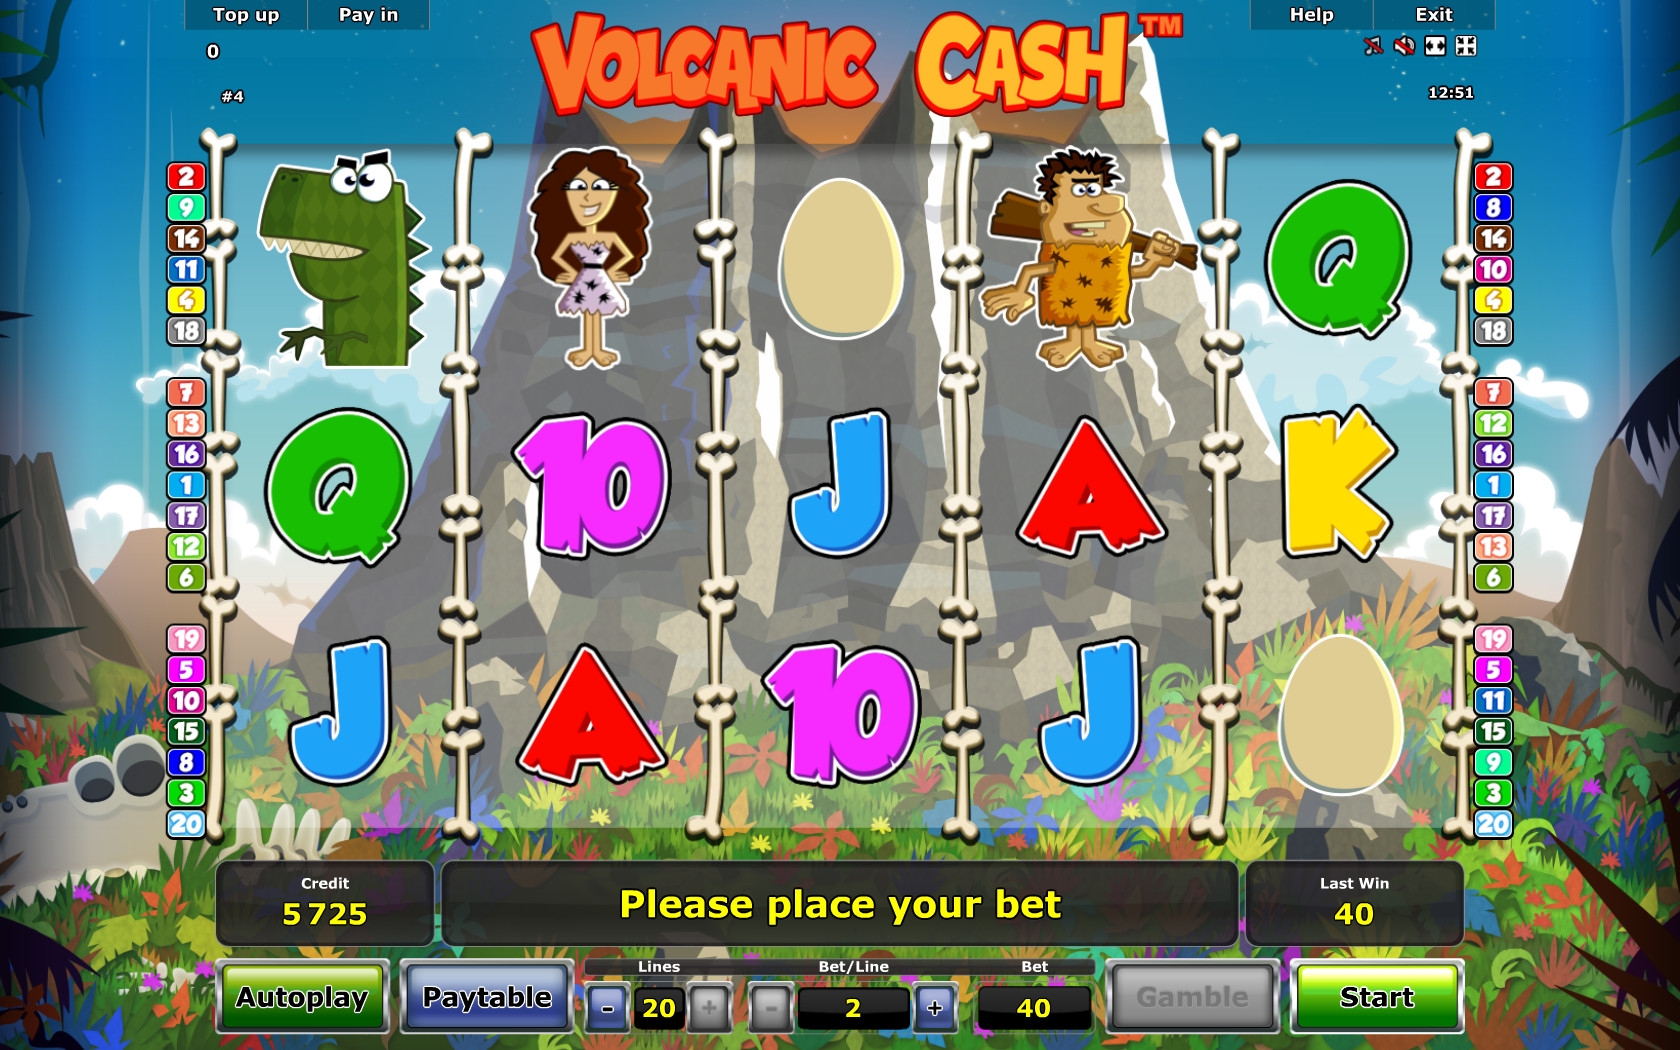 Volcanic Cash (Volcanic Cash) from category Slots